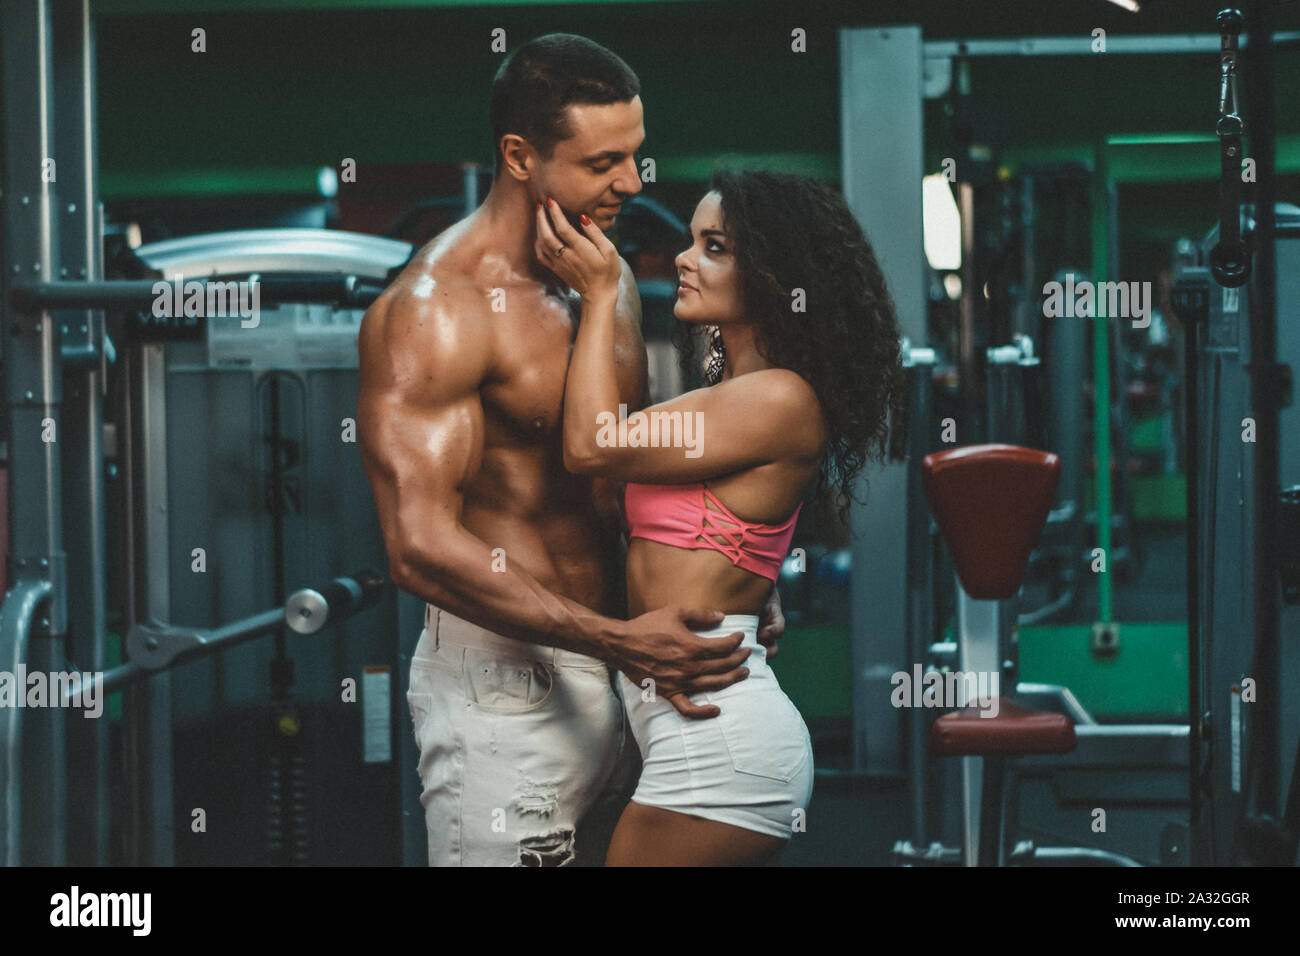 muscular woman and man in gym.sportive life. fitness. gym. hot curly woman. handsome bodybuilder. sportive couple in gym . Stock Photo